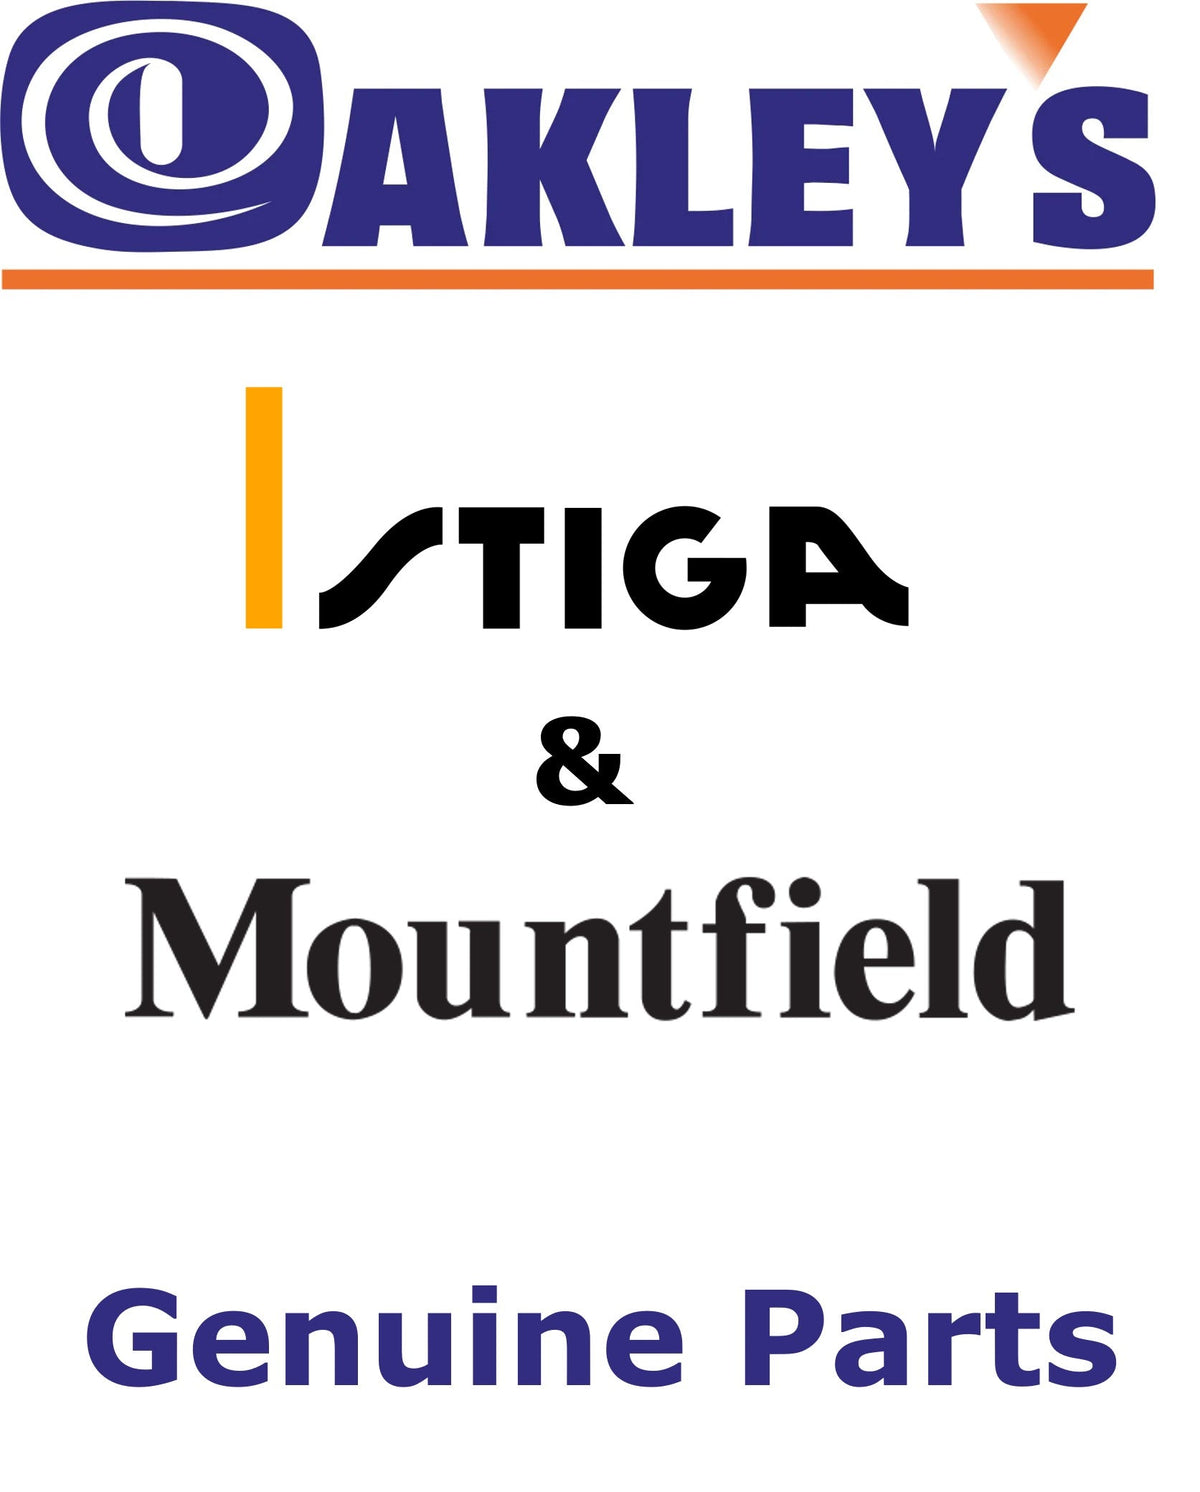 Stiga / Mountfield Genuine Parts - "ATCO 39 EASY CLEAN" DECAL - P/N: 114372258/0